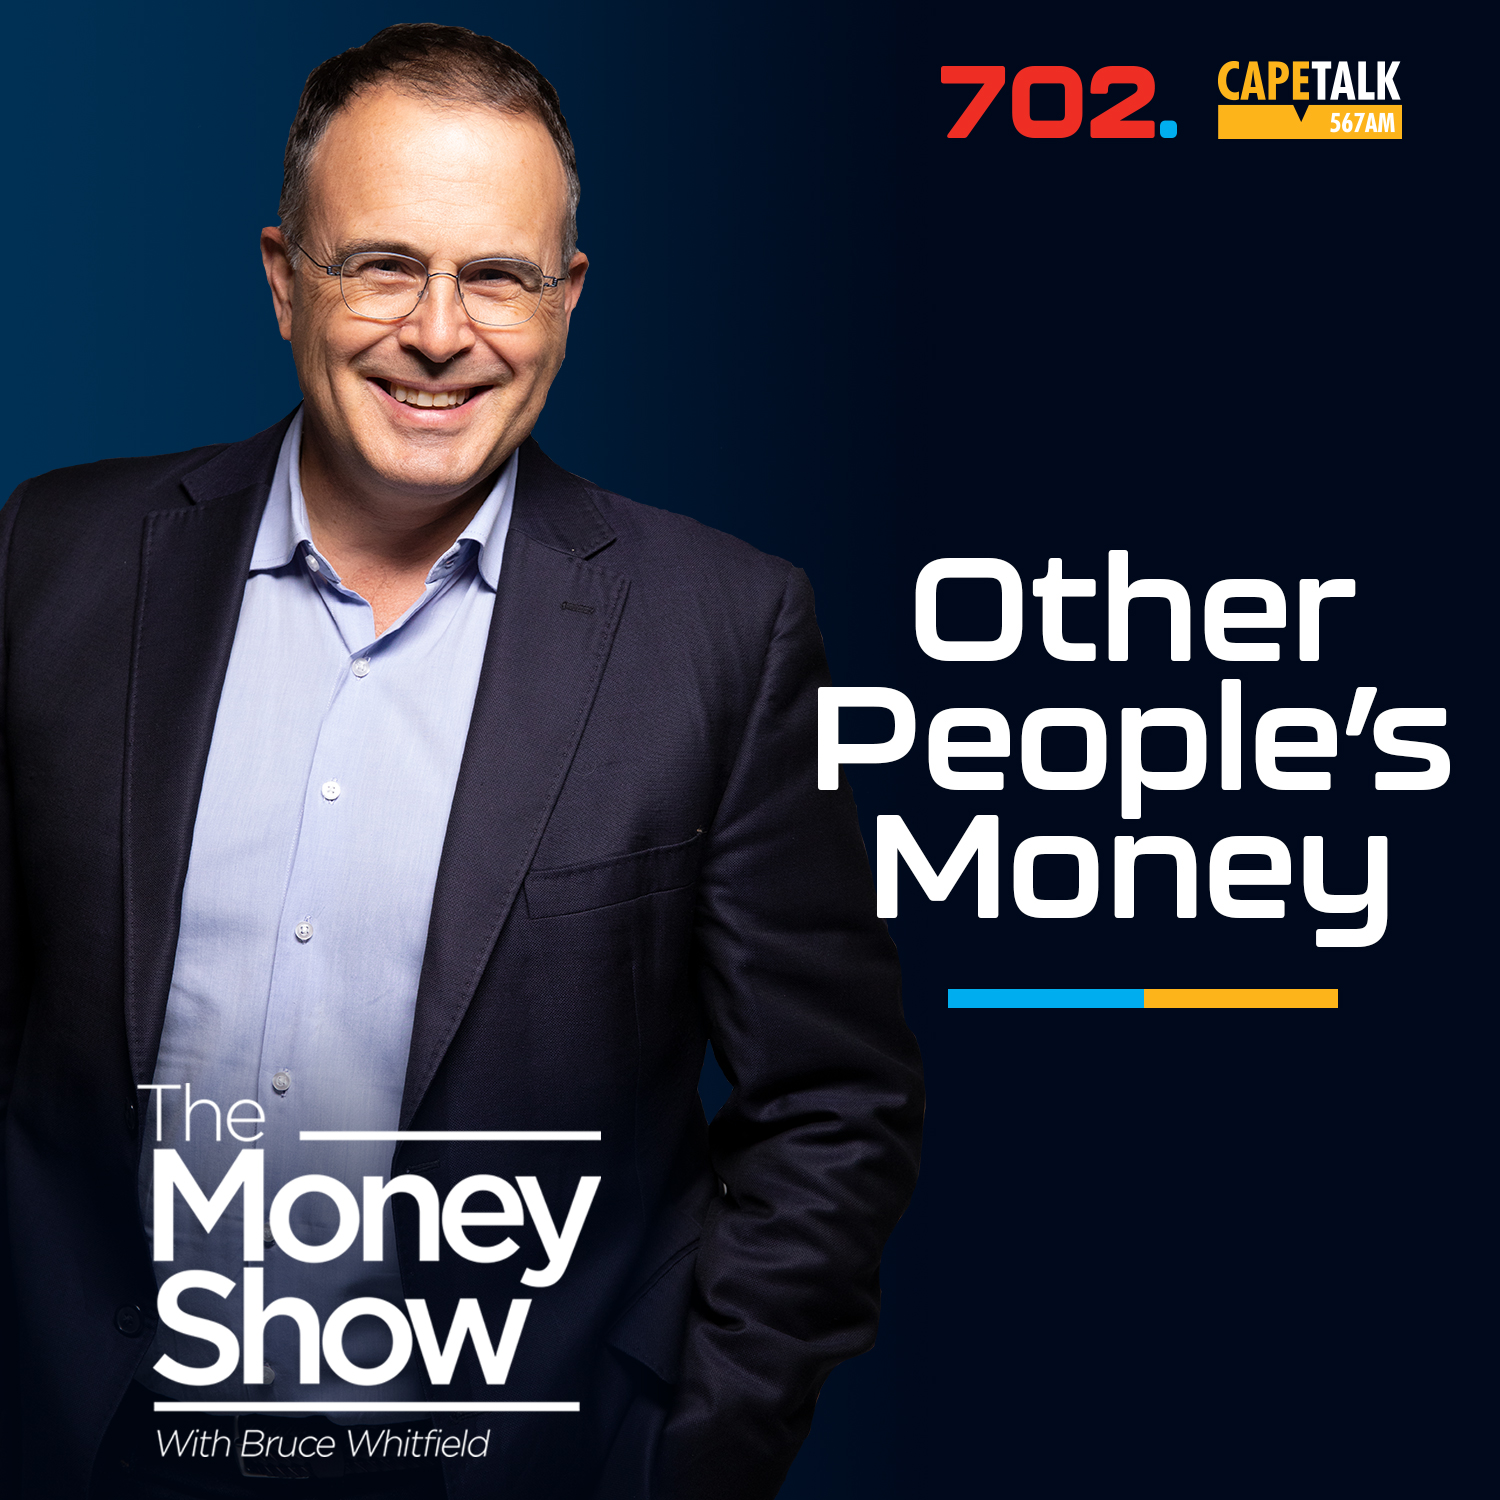 Other People’s Money - Tim Harford , economist and author